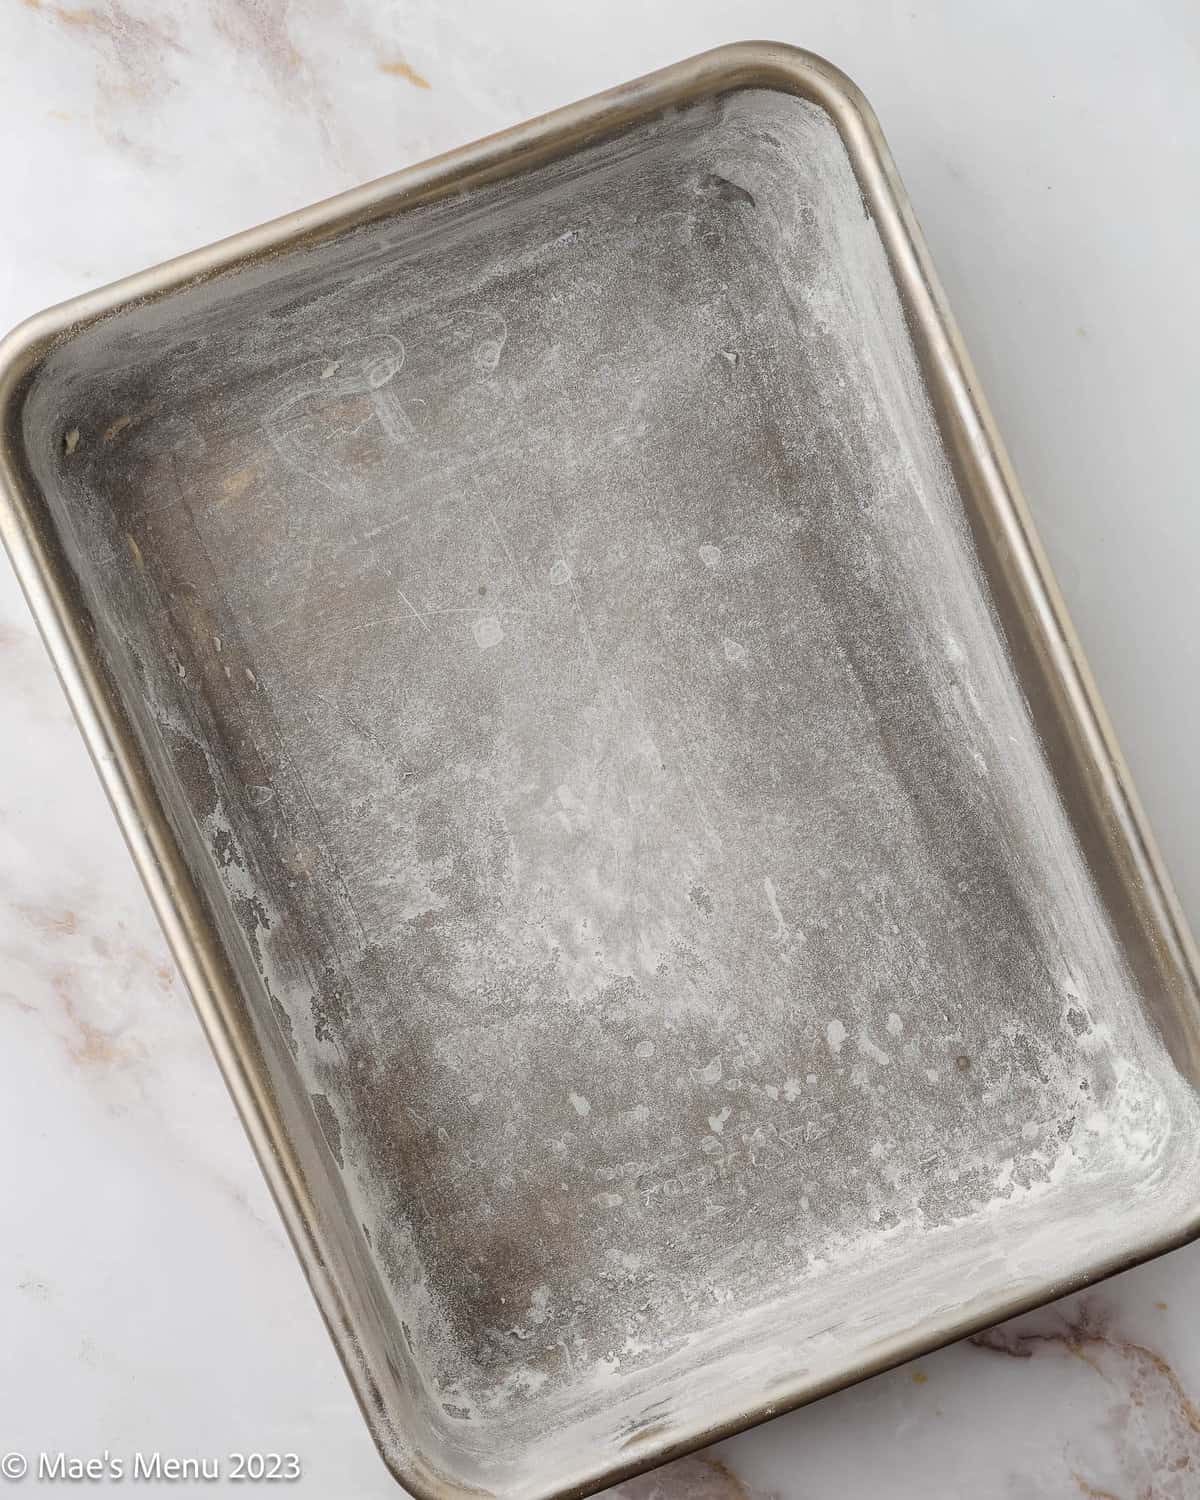 A prepared cake pan on the counter.